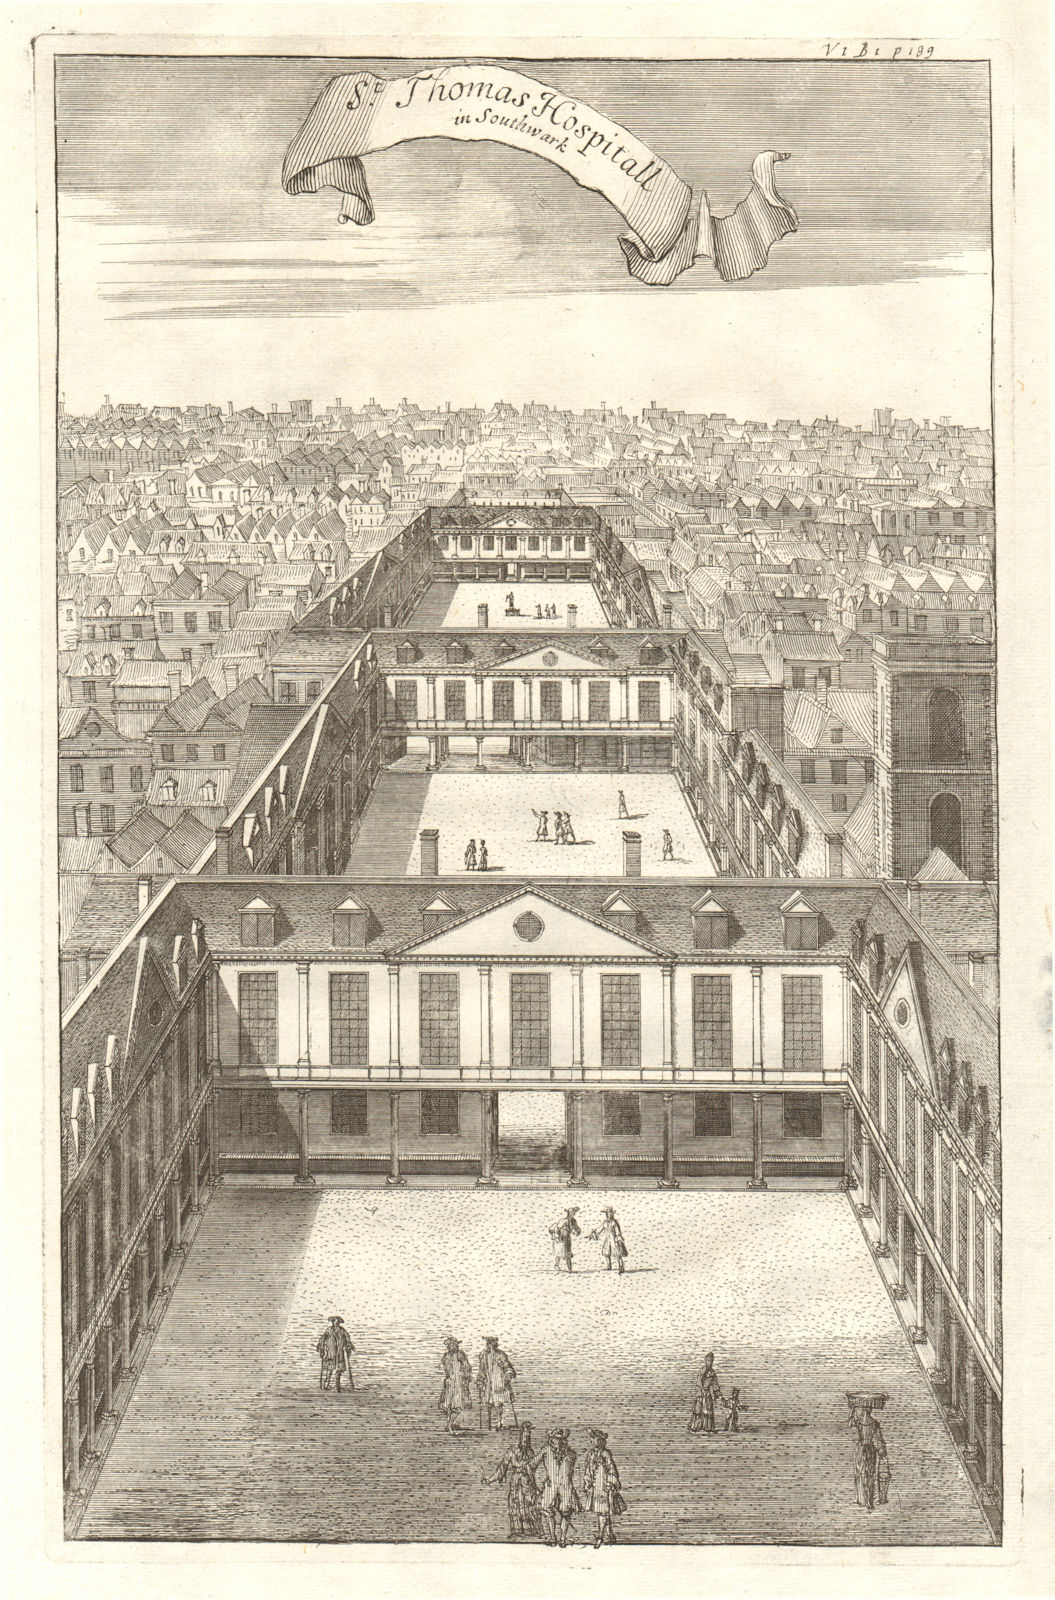 Associate Product 'St Thomas's Hospitall in Southwark', London. STOW/STRYPE 1720 old print